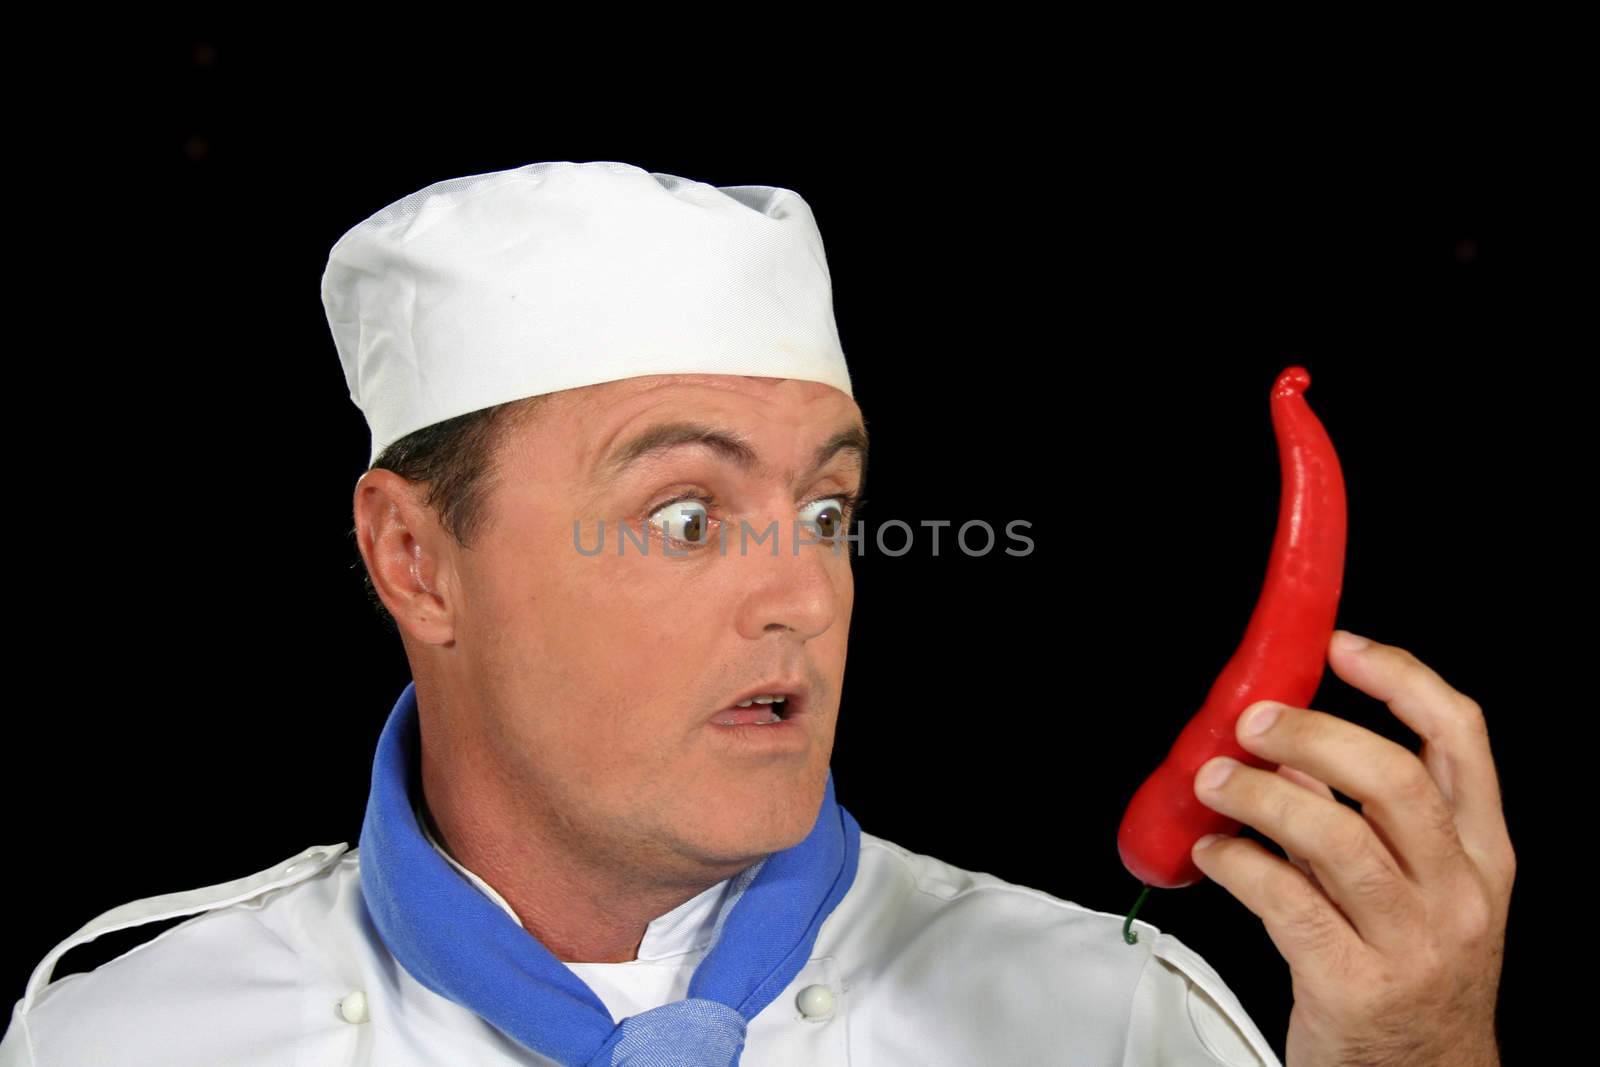 Surprised chef with a giant chili pepper.